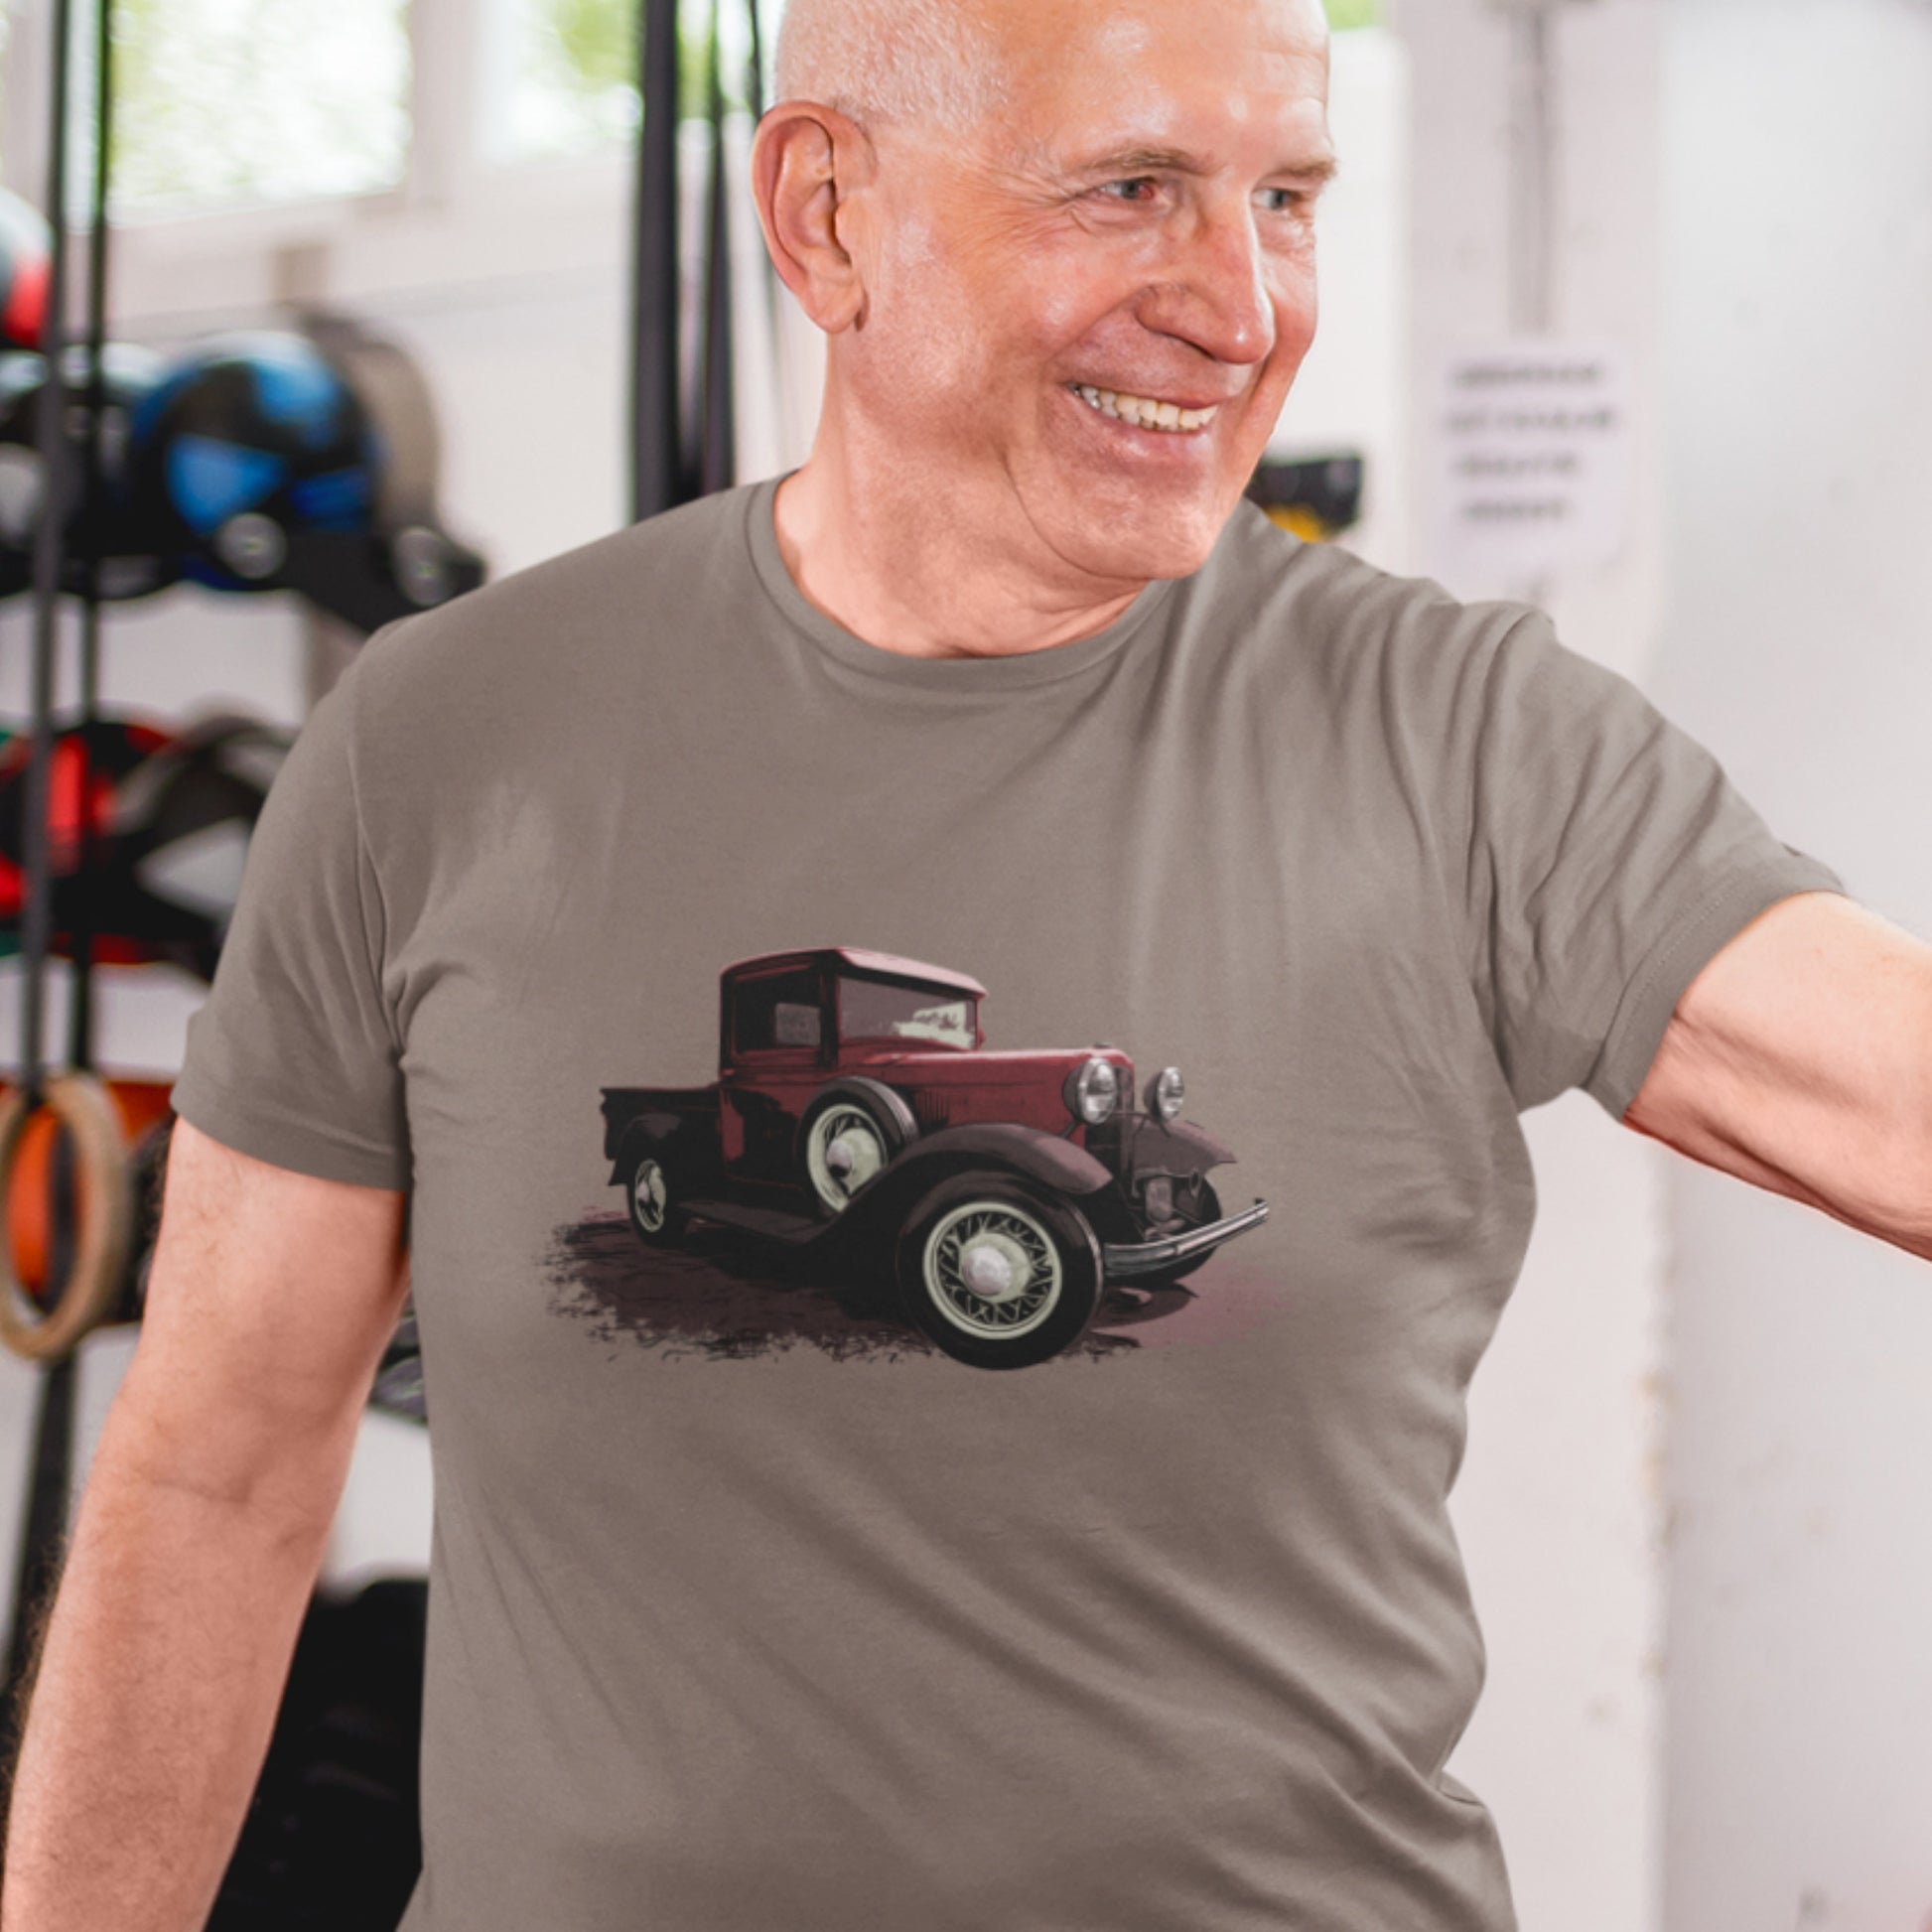 Classic Truck Shirt featuring a red Ford Model A truck